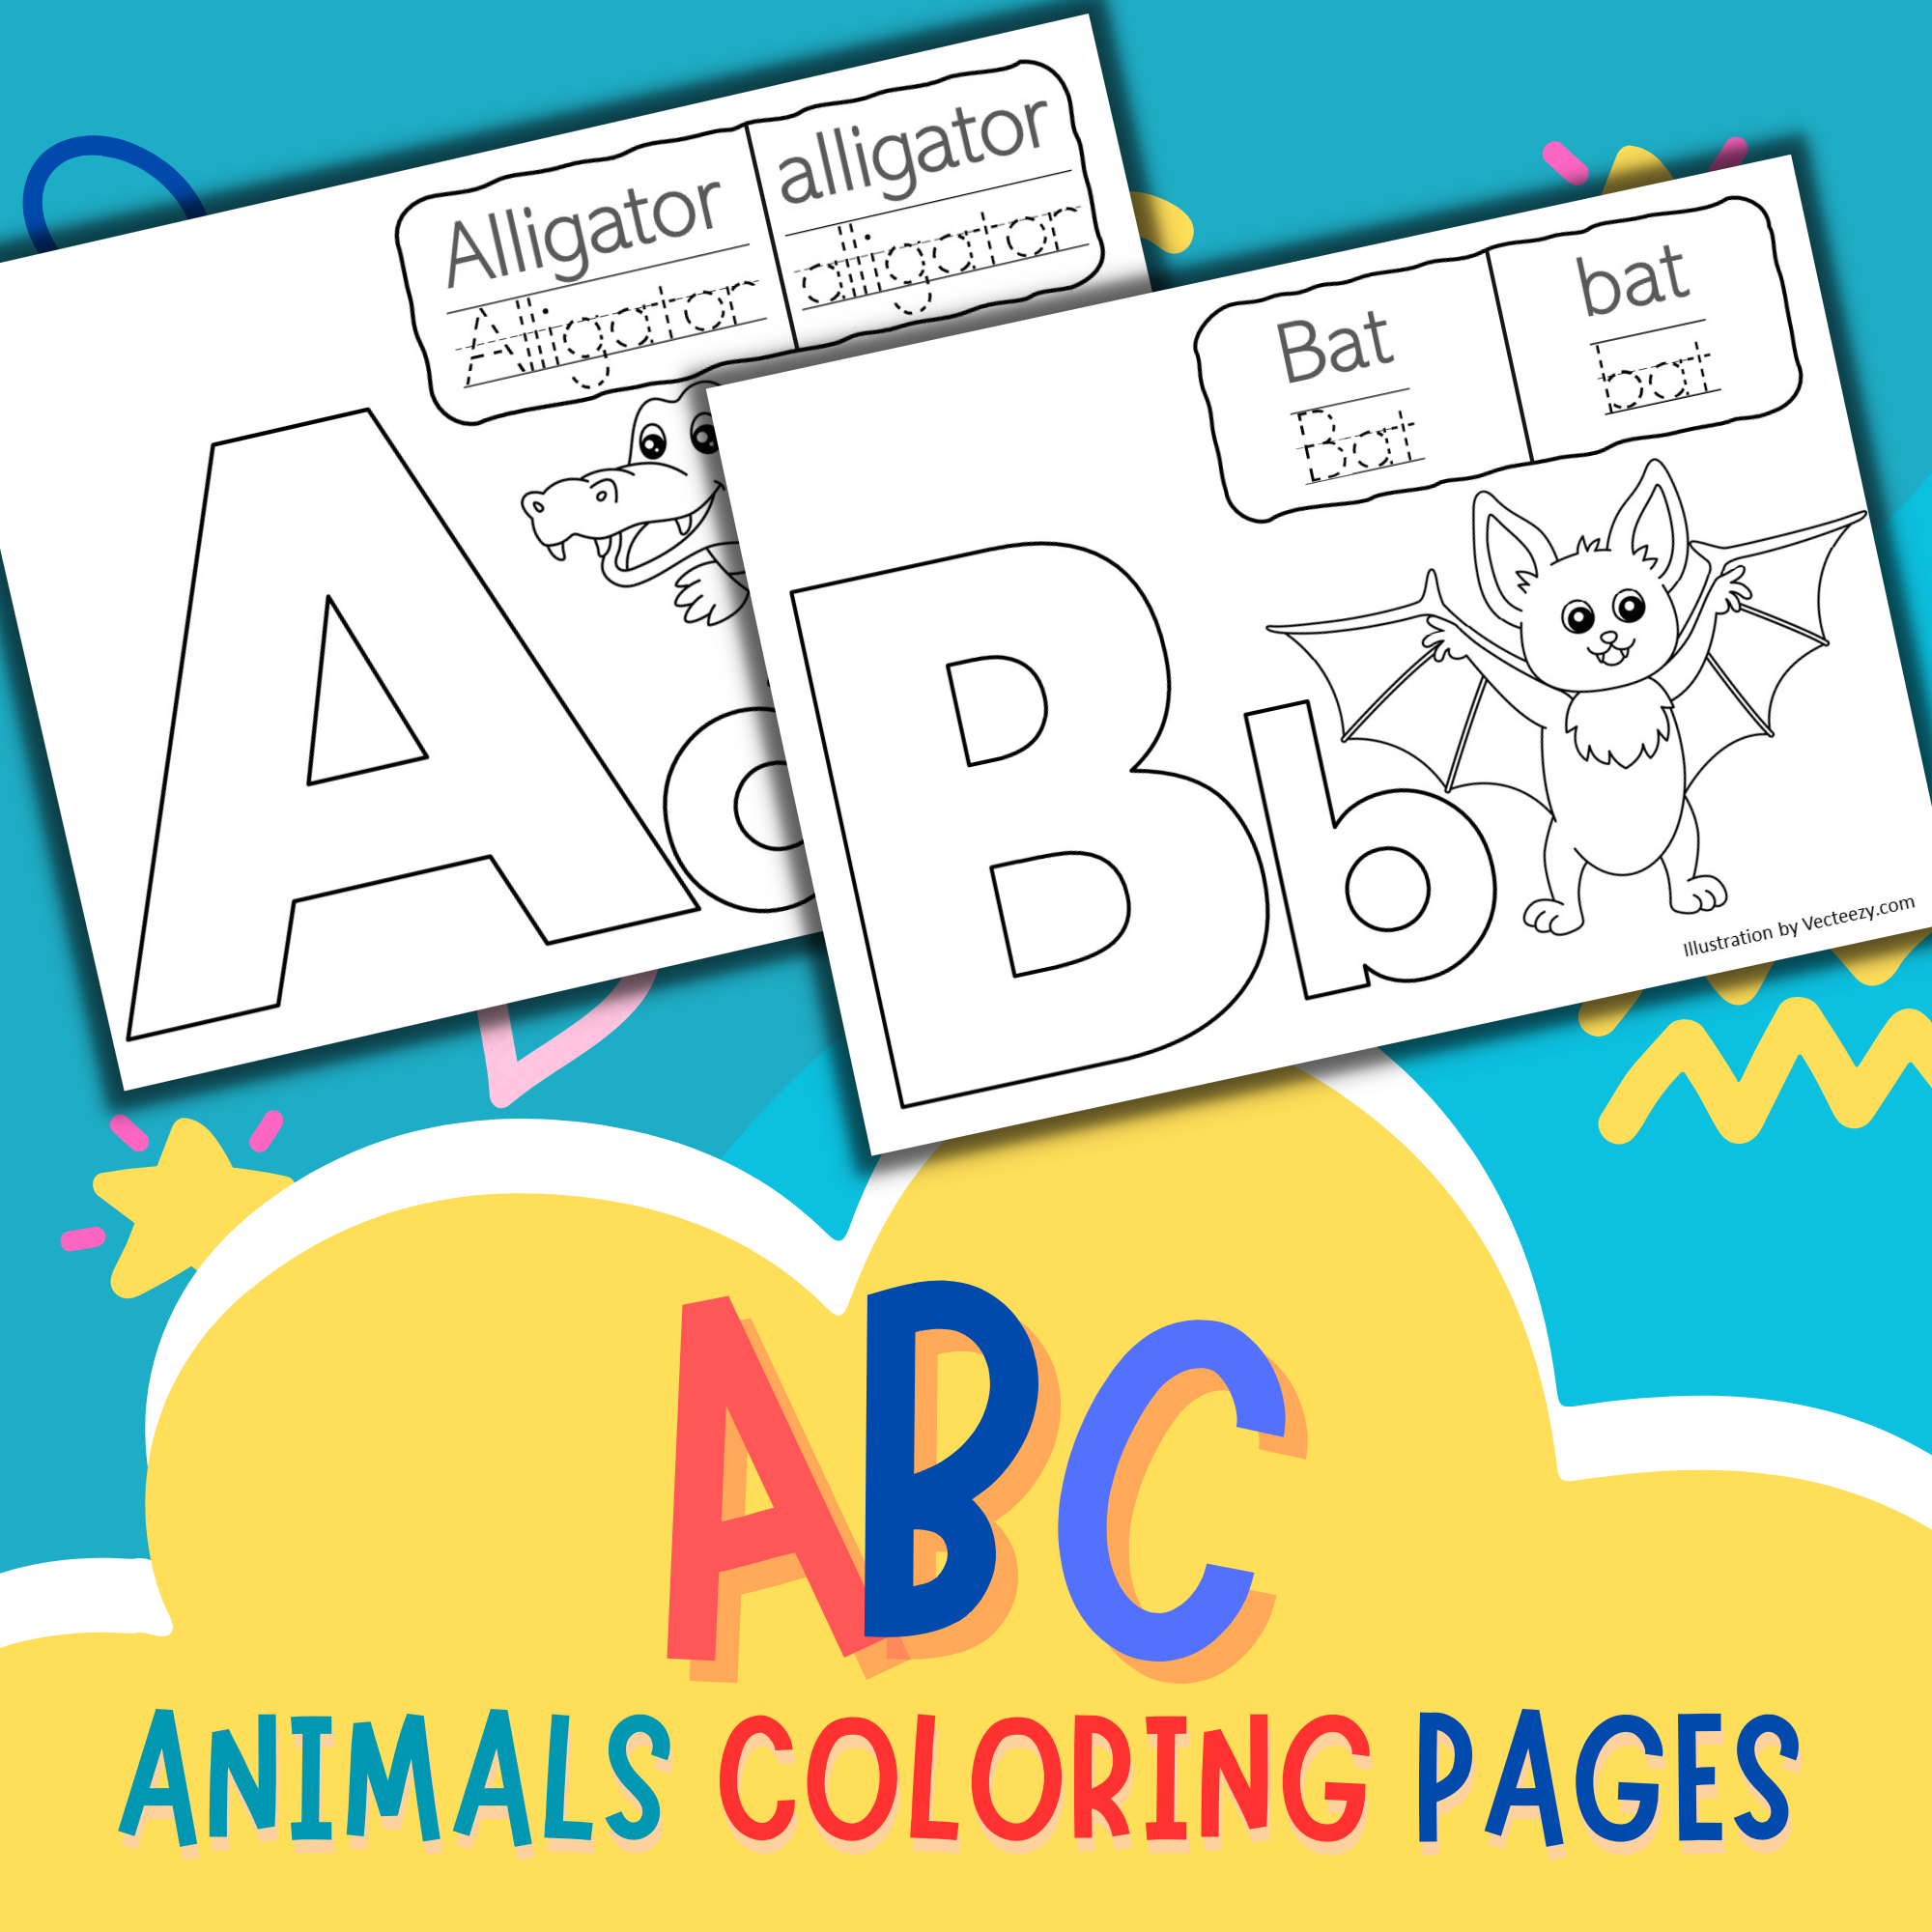 Abc animals coloring pages learn alphabet with animals worksheets made by teachers